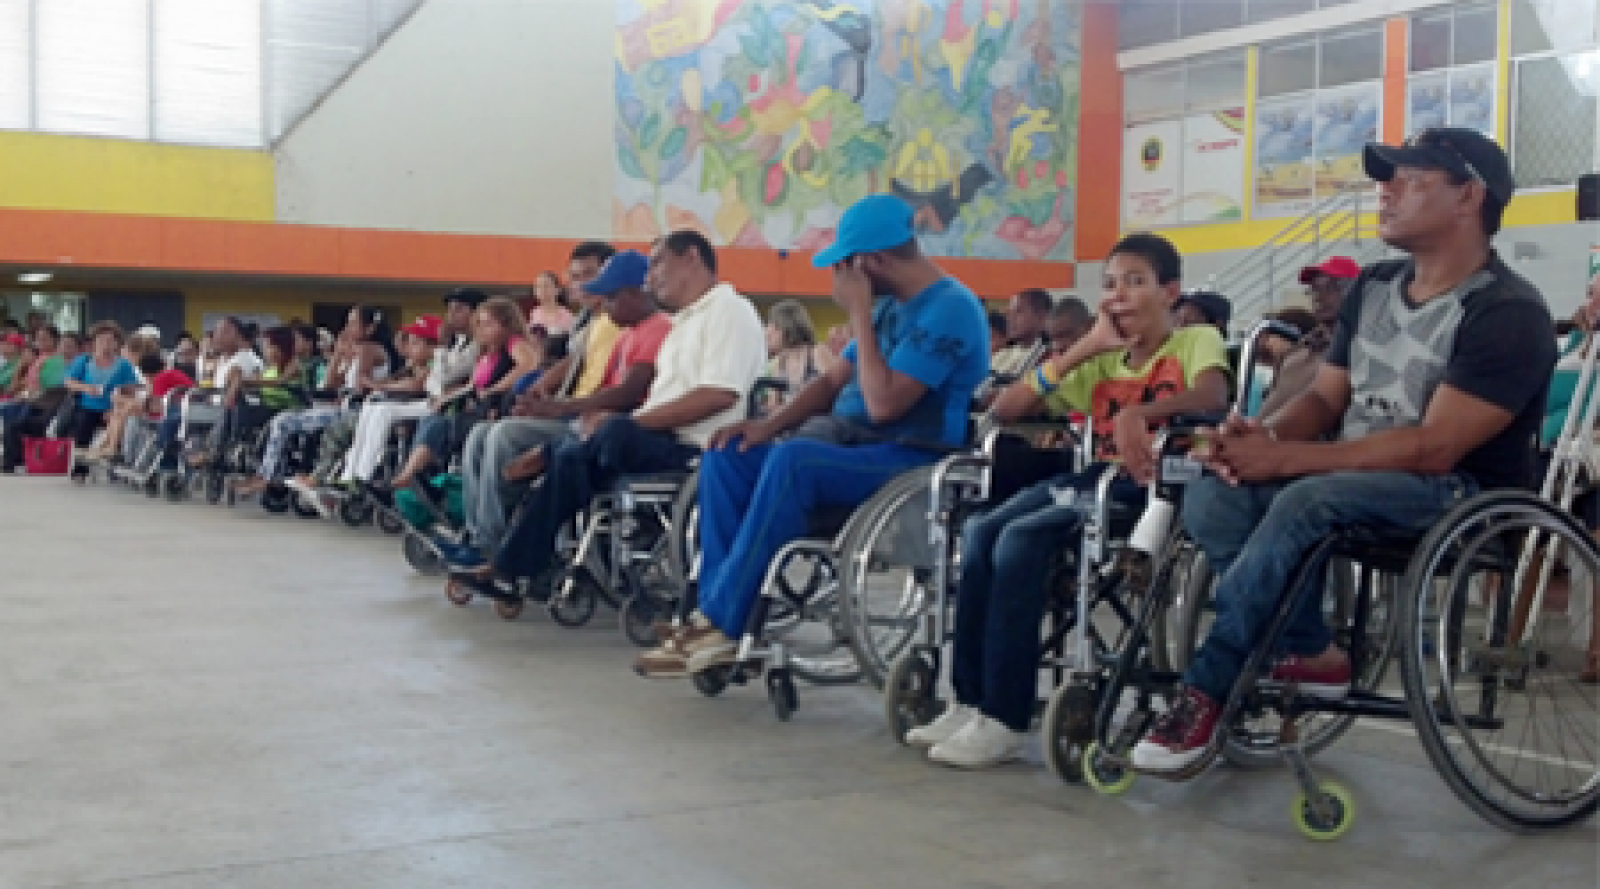 Cartagena, Colombia's first public hearing for citizens with disabilities.